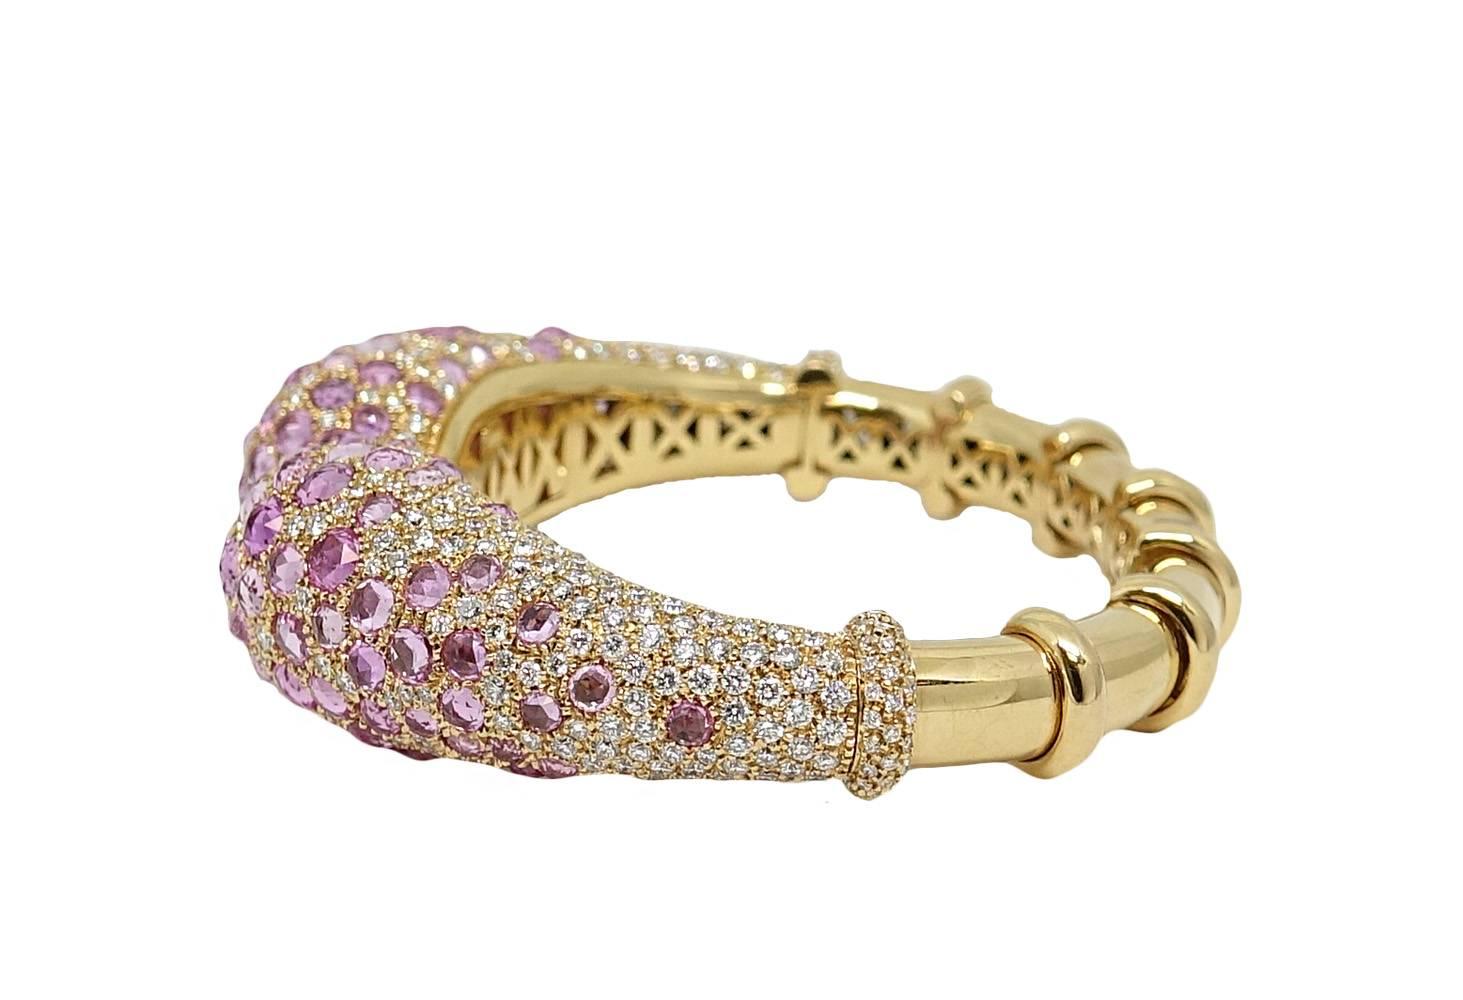 This Absolutely Stunning 18K Yellow Gold Bangle Has Sporadic Vibrant Pink Sapphires Covering The Tear Drop Shaped Opening Of This Bangle and Weigh A Total Carat Weight Of 25.98 Carats. Small Sparkling Round Diamonds Are Irregularly Placed Around The